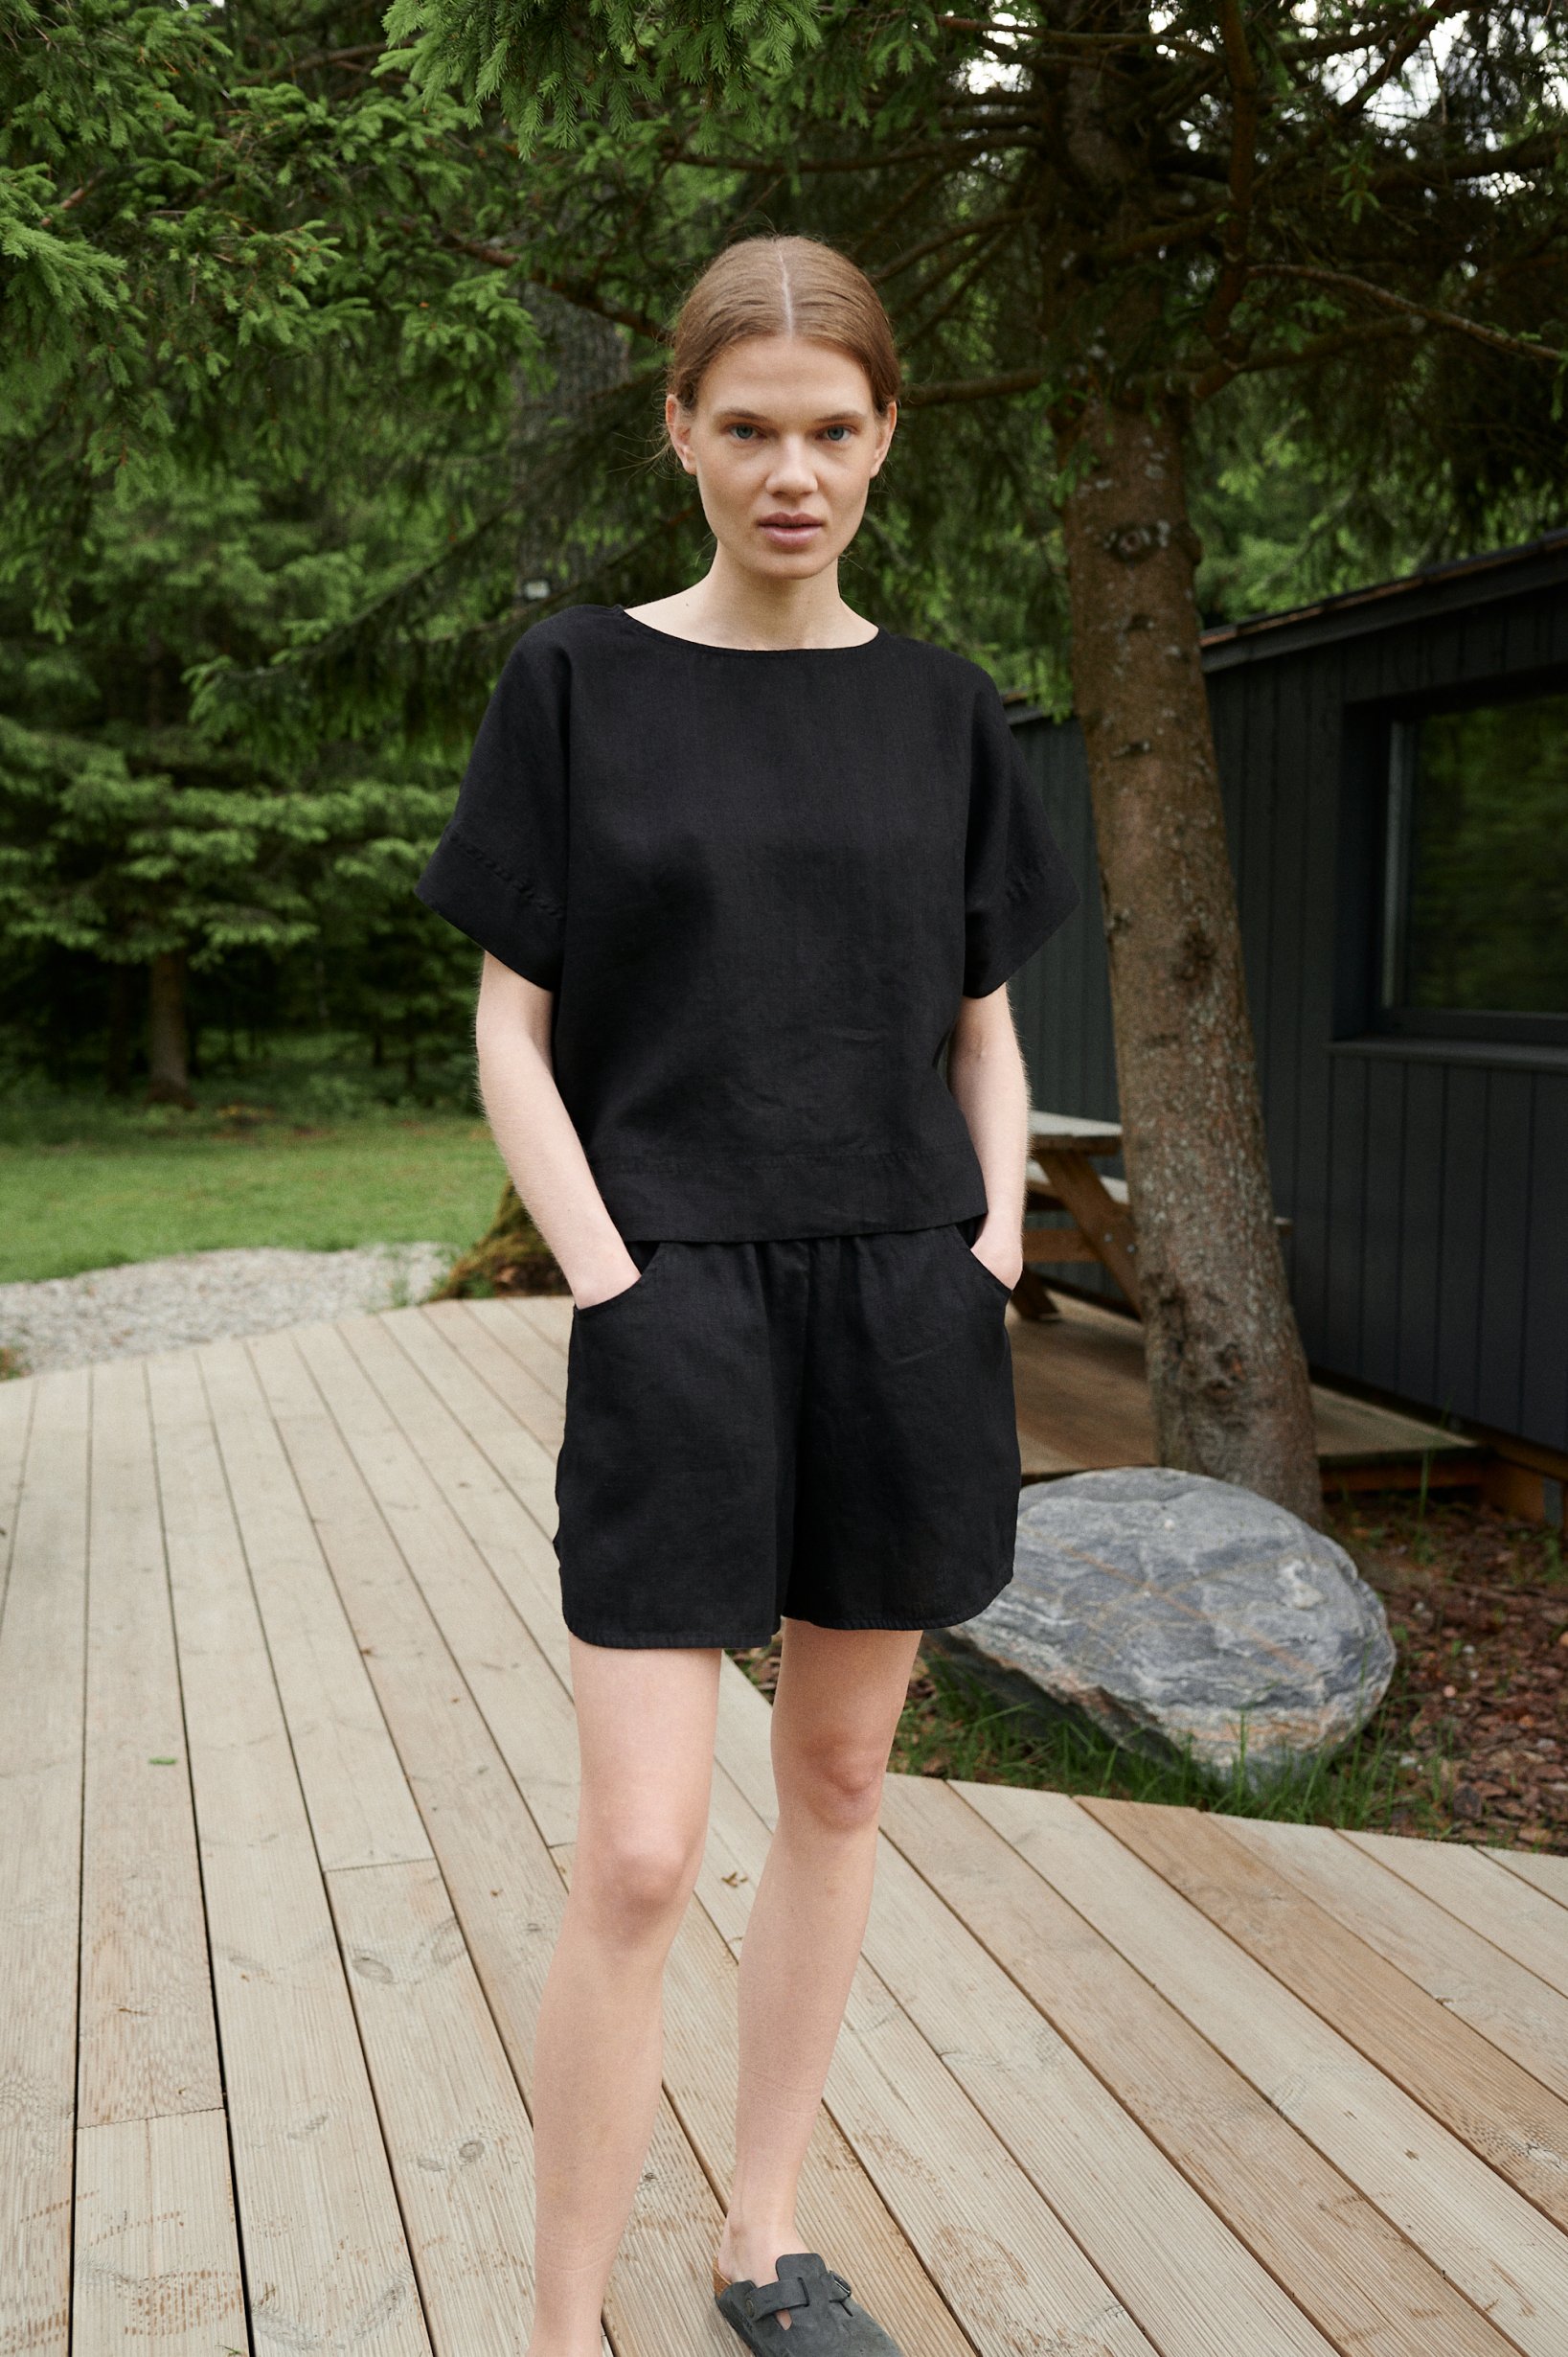 Model in an oversized black linen top and matching linen shorts